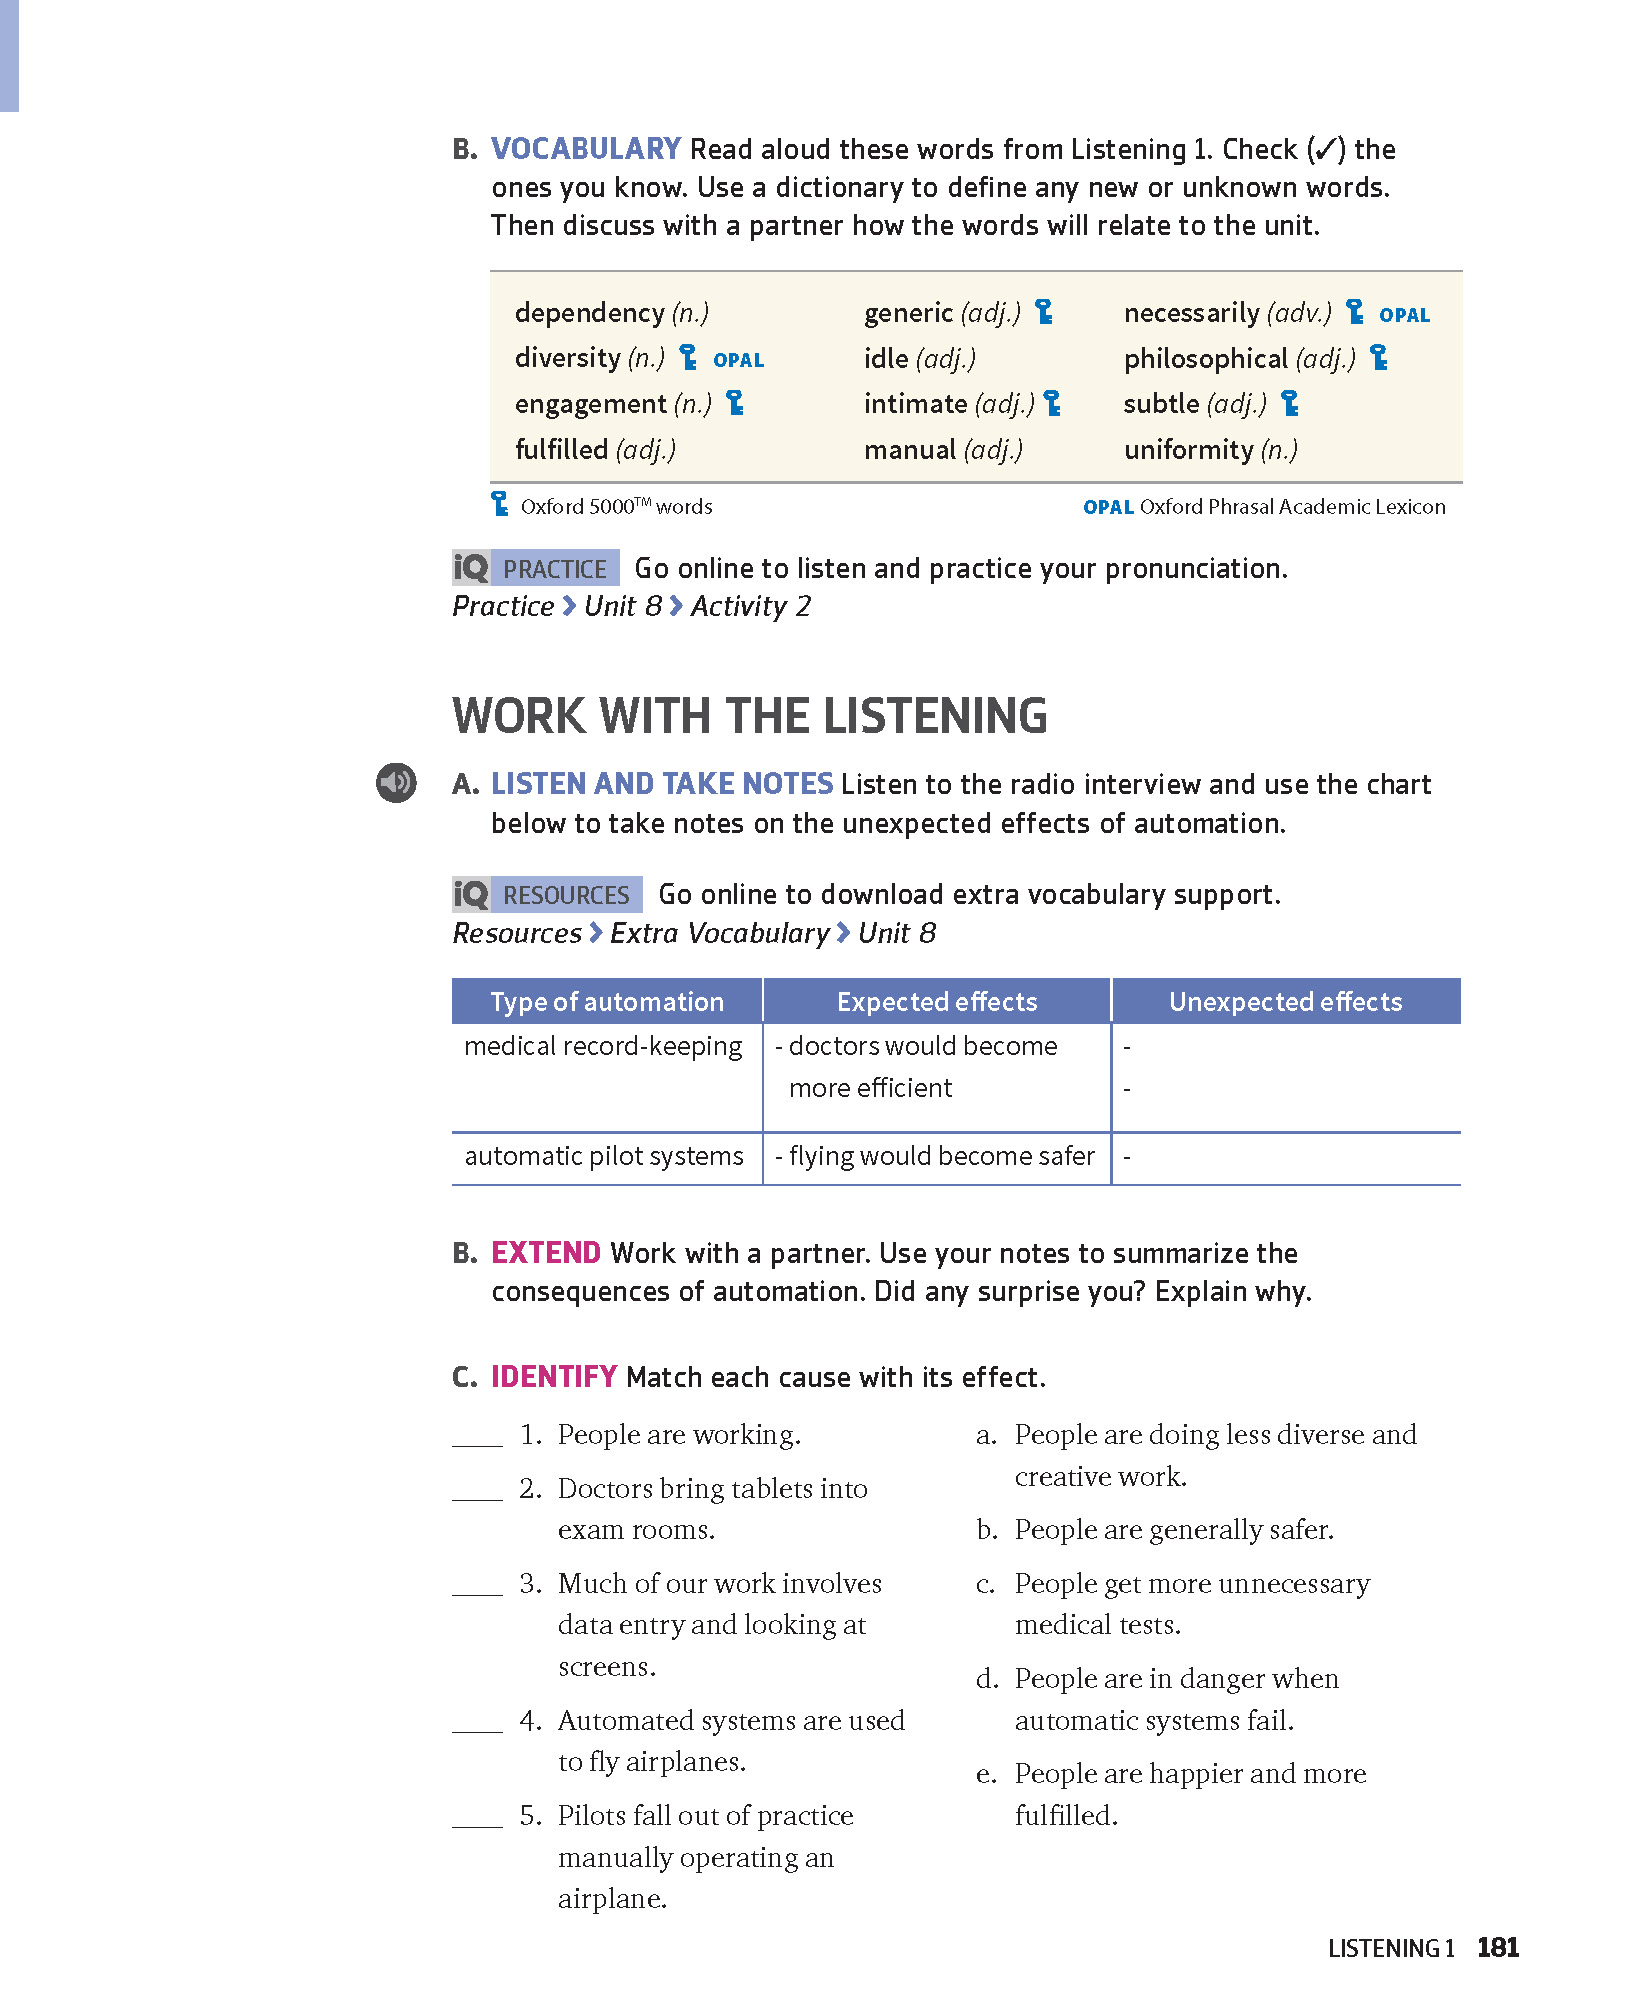 Q: Skills for Success 3rd Edition: Level 4: Listening & Speaking Student Book with IQ Online Practice